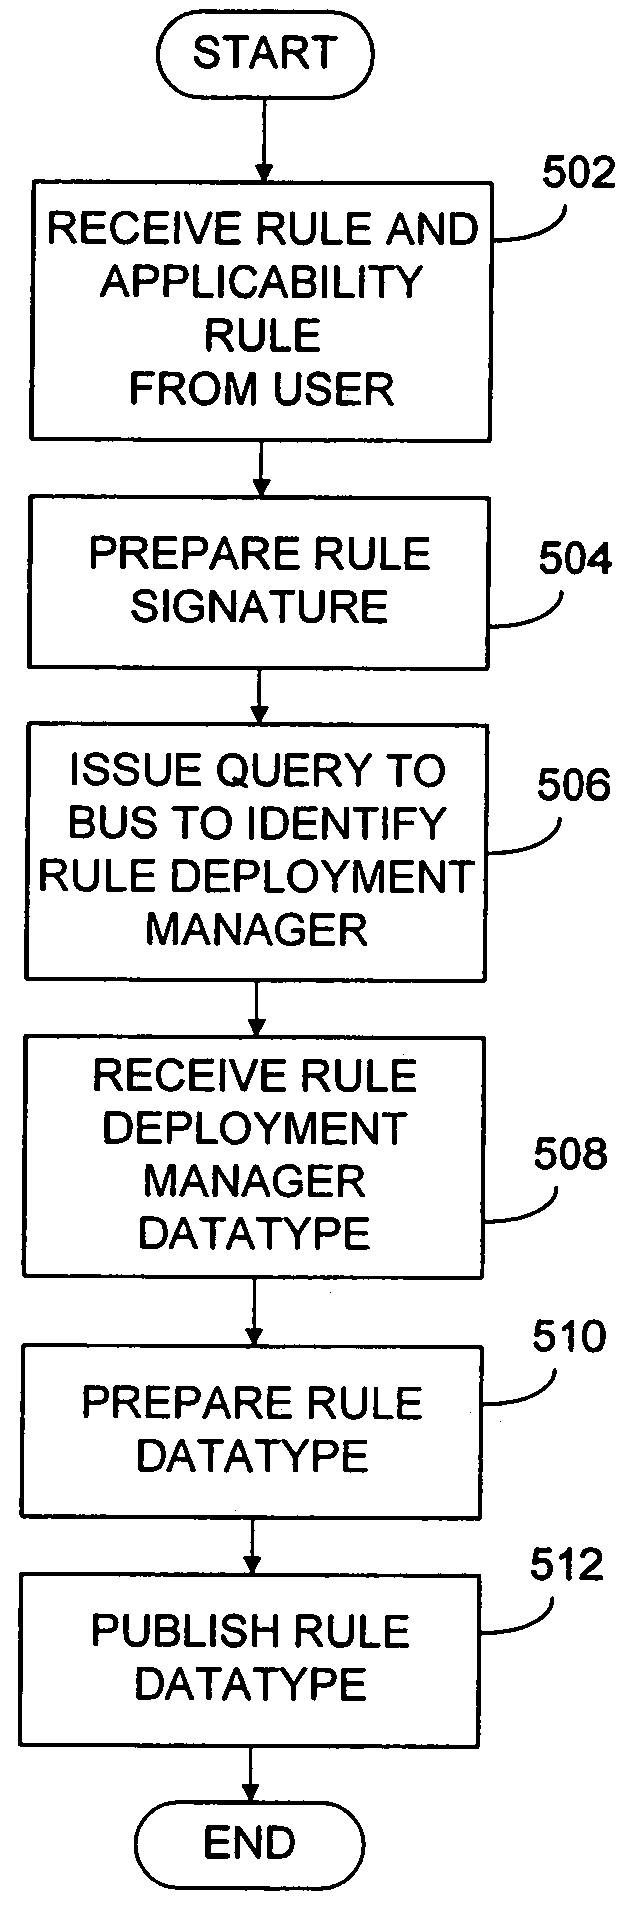 Managing and predicting risk for computer devices using exposure management techniques